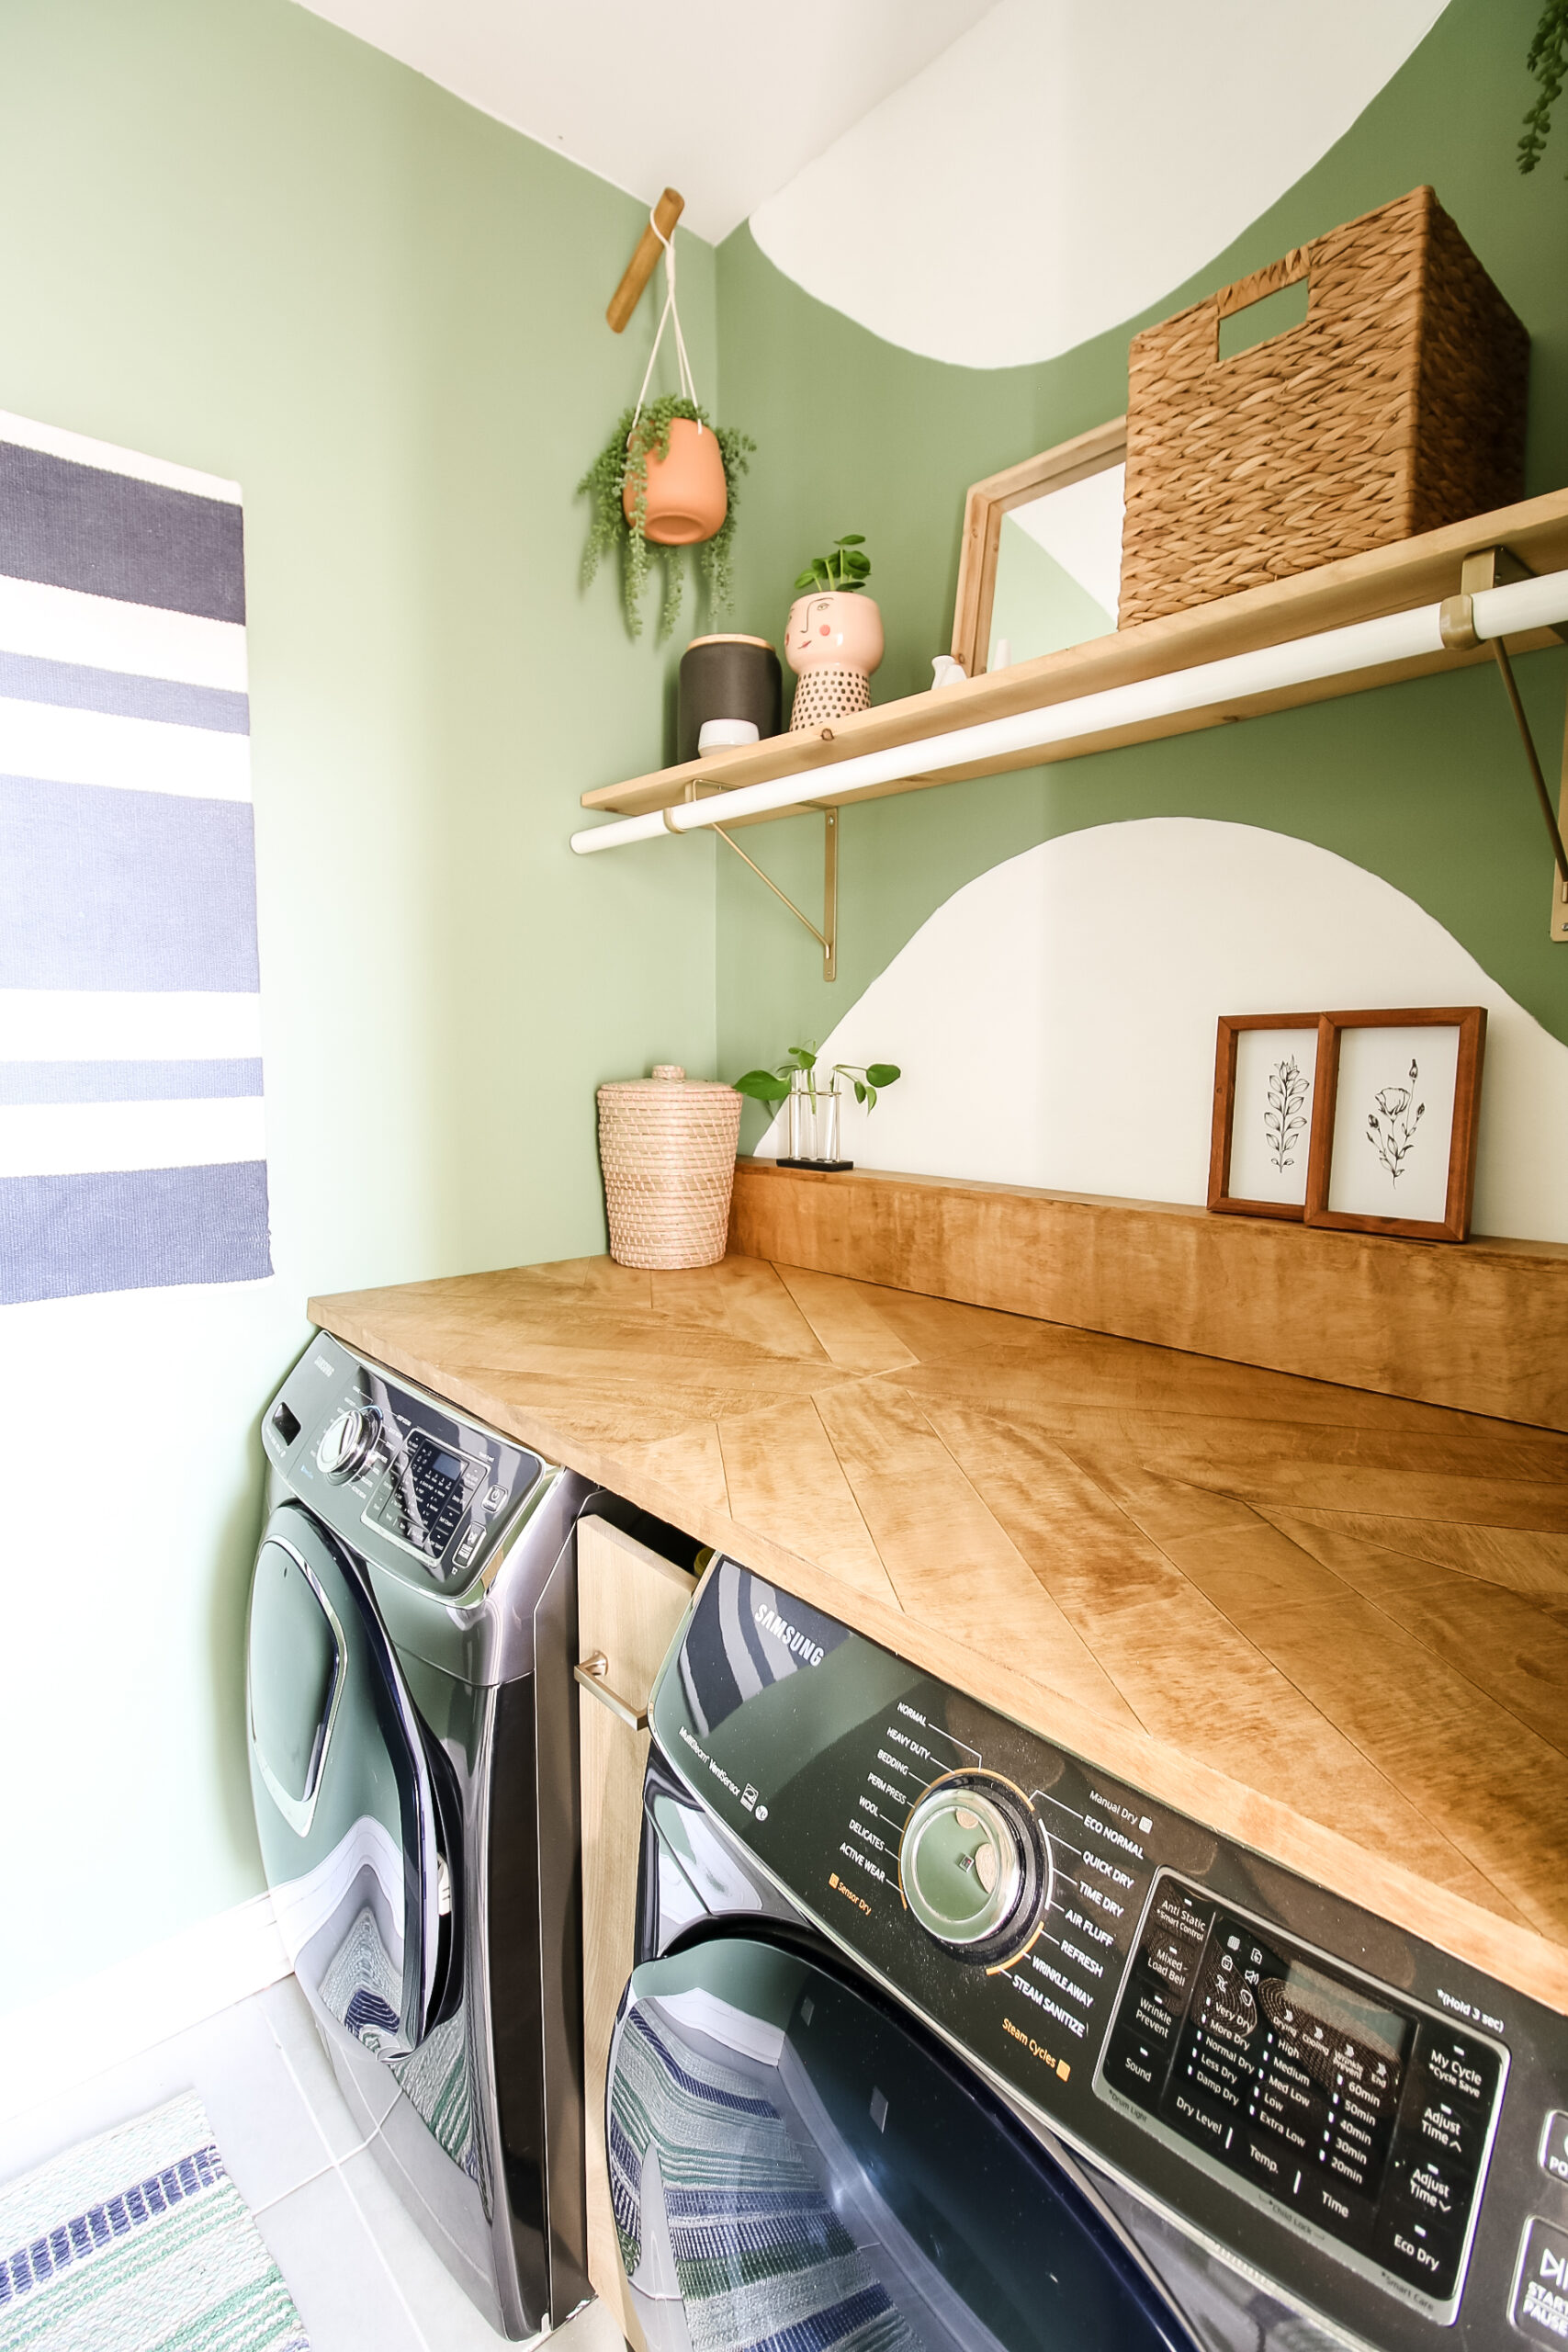 Laundry Room Make Over Transformation with DIY Shelving